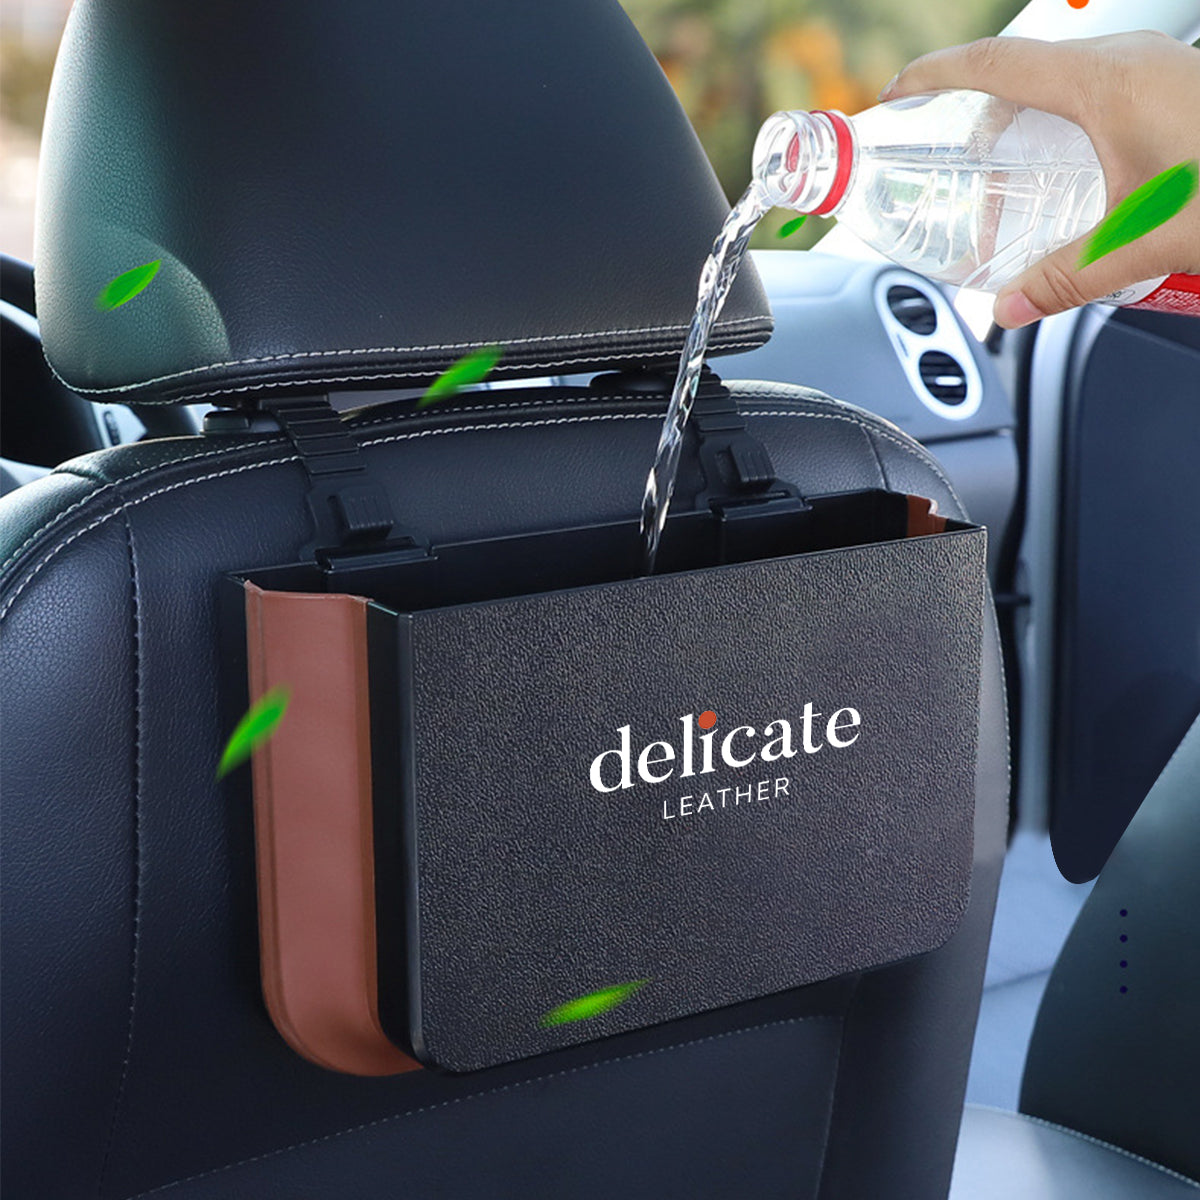 Hanging Waterproof Car Trash can-Foldable, Custom For Your Cars, Waterproof, and Equipped with Cup Holders and Trays. Multi-Purpose, Car Accessories HY11992